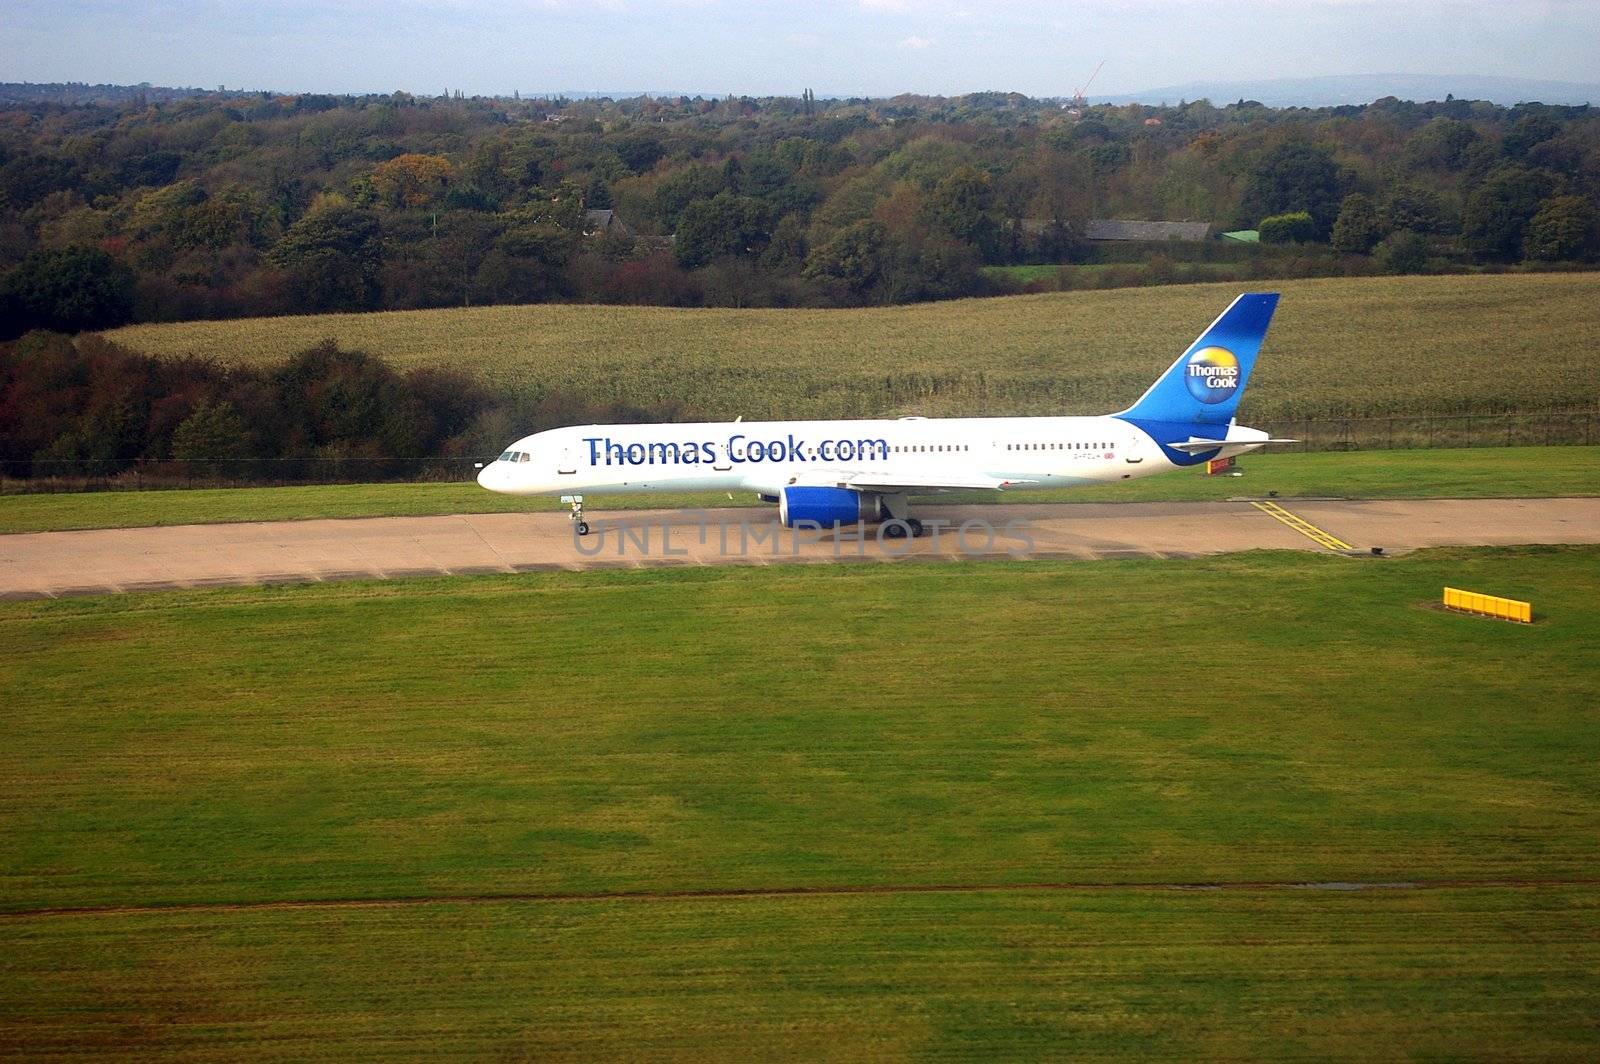 Thomas Cook flight at Manchester airport. This British tour operator carried 7,969,693 passengers during 2011, and employs 19,000 people in the travel industry. Manchester, UK.